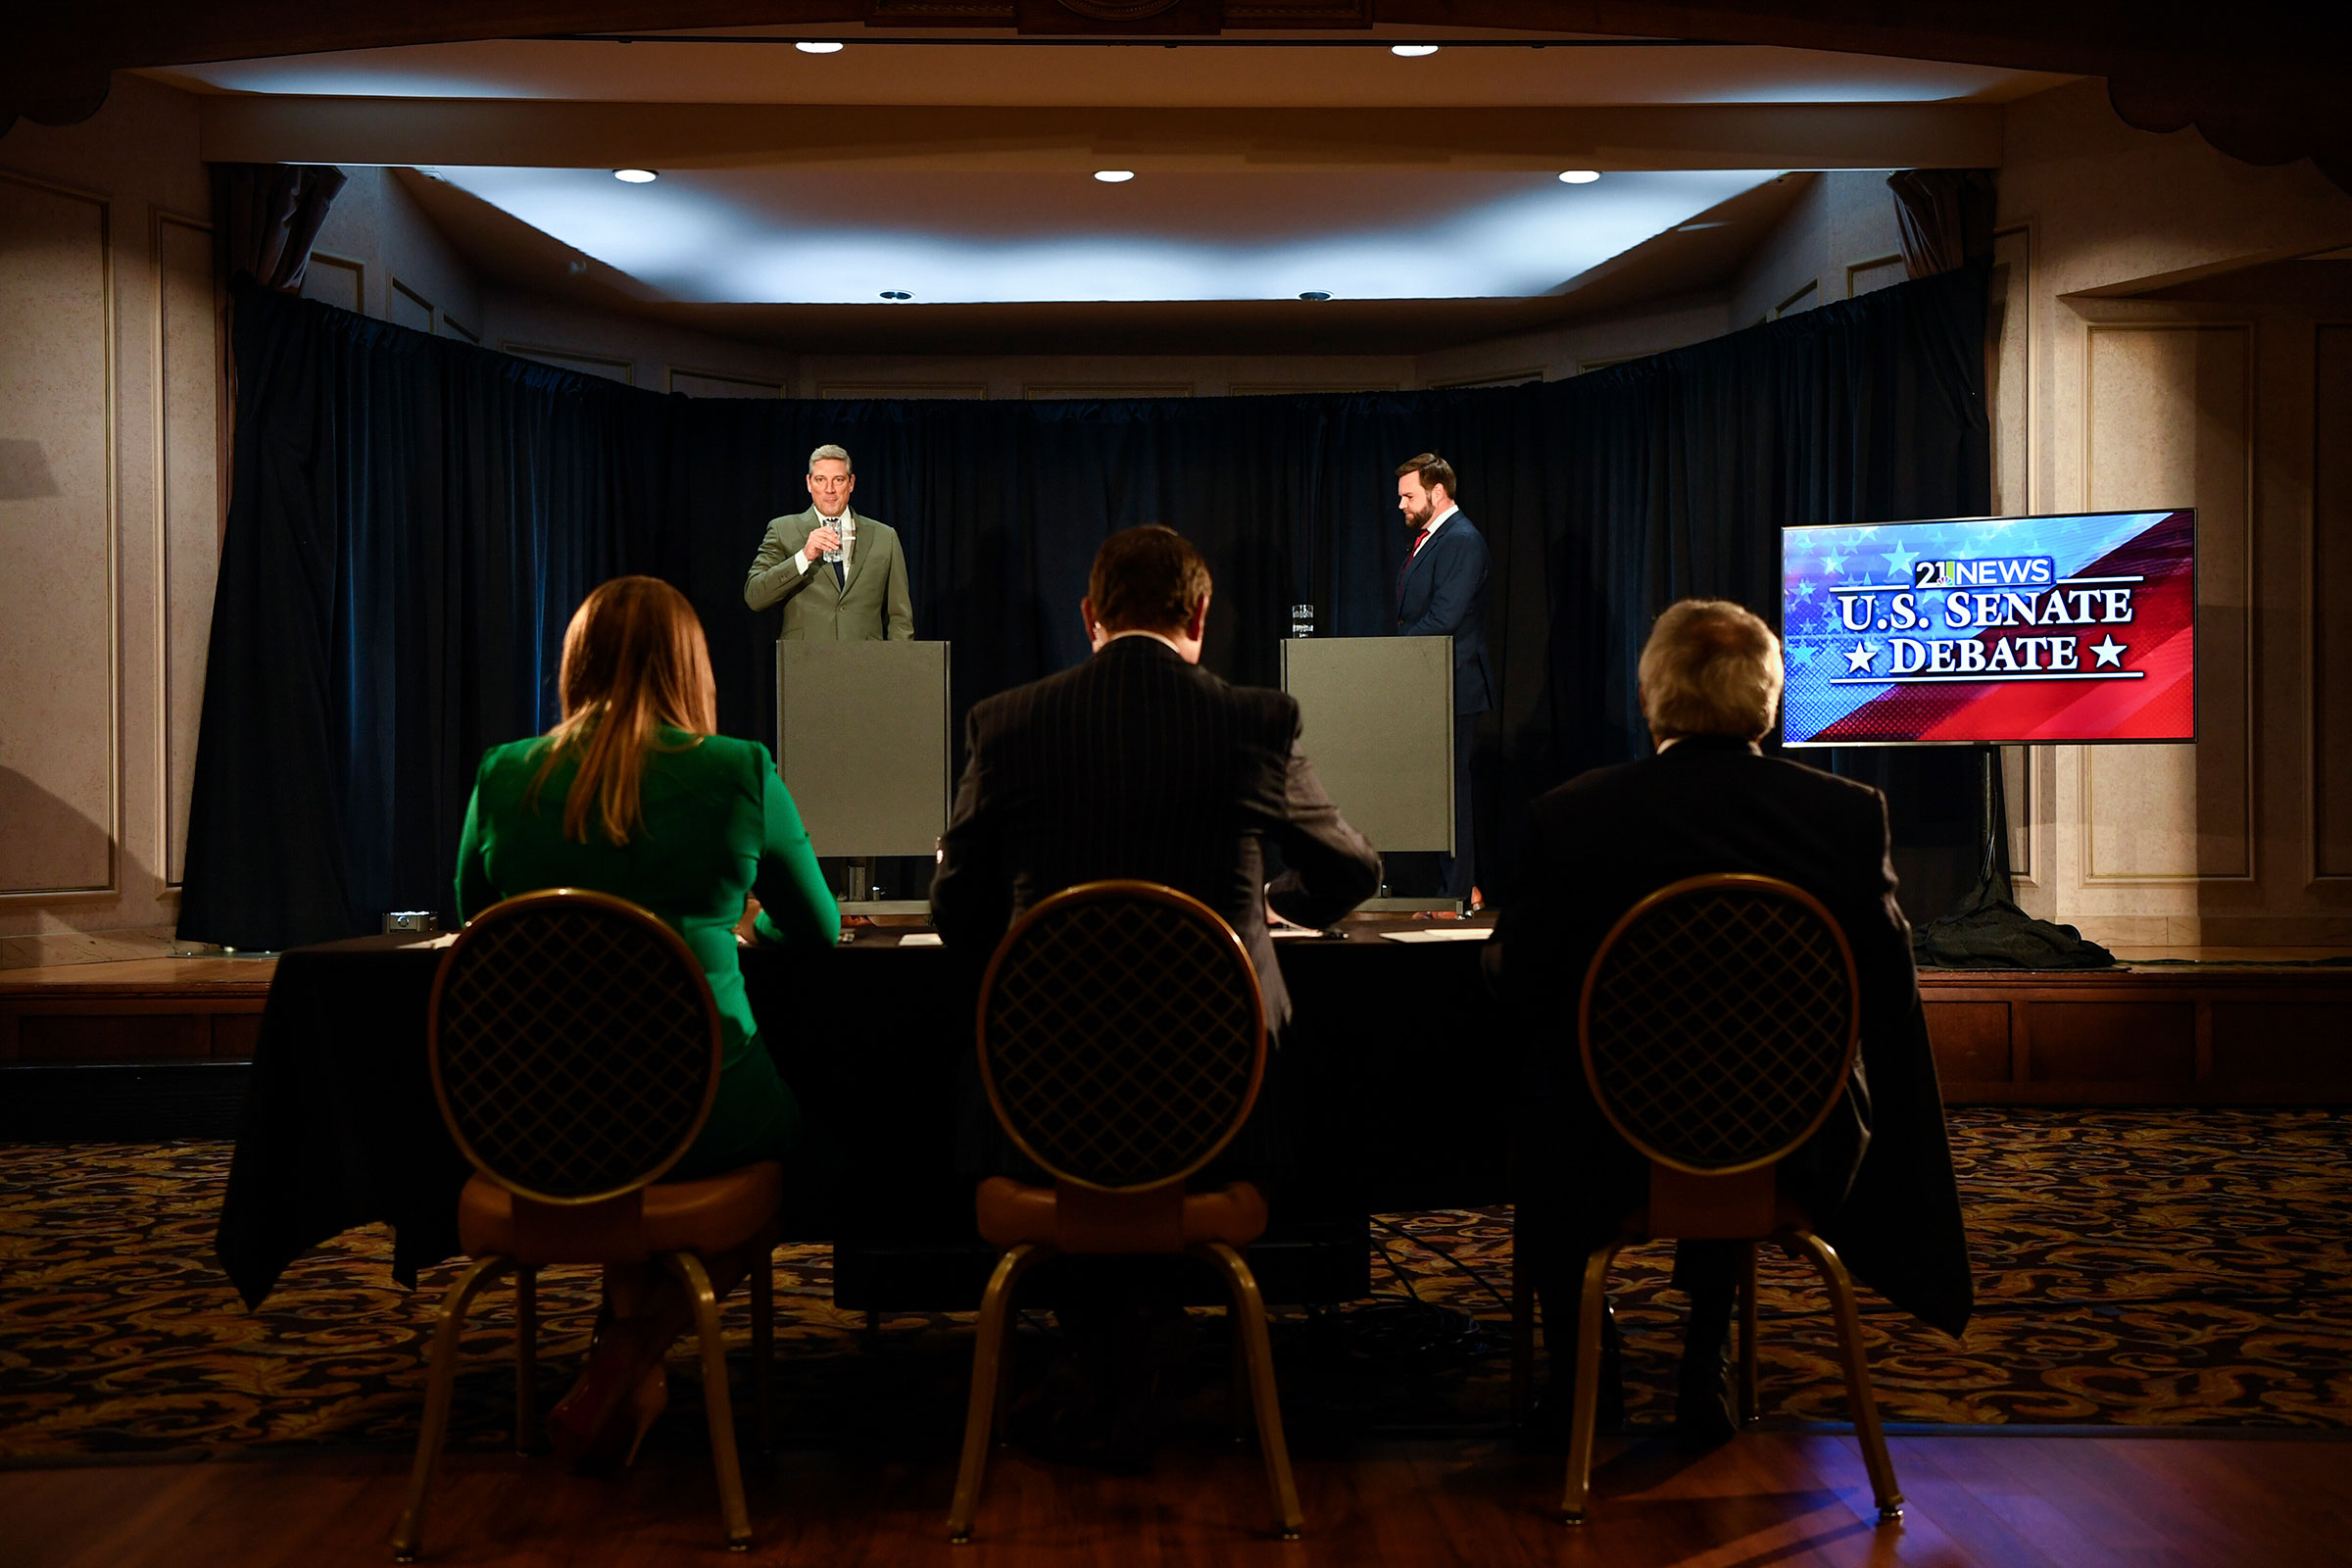 Senate candidates Rep. Tim Ryan (D-Ohio), left, and Republican JD Vance, await the start of their second debate in Youngstown, Ohio, on Monday, Oct. 17, 2022. (Gaelen Morse/The New York Times)